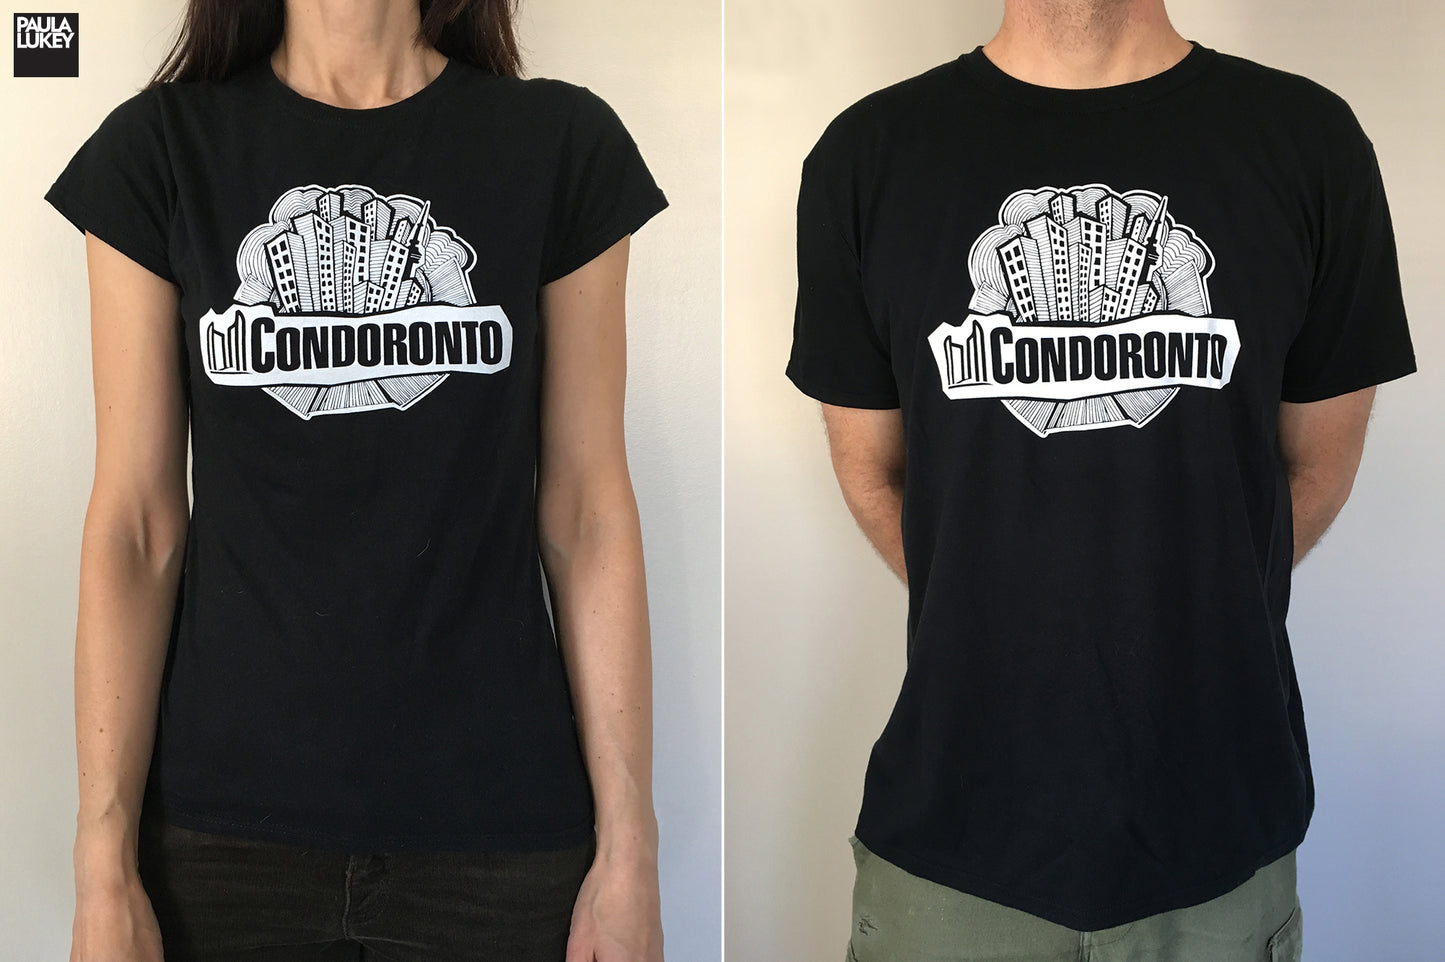 Hand Printed CONDORONTO Tee - Men and Women Fit